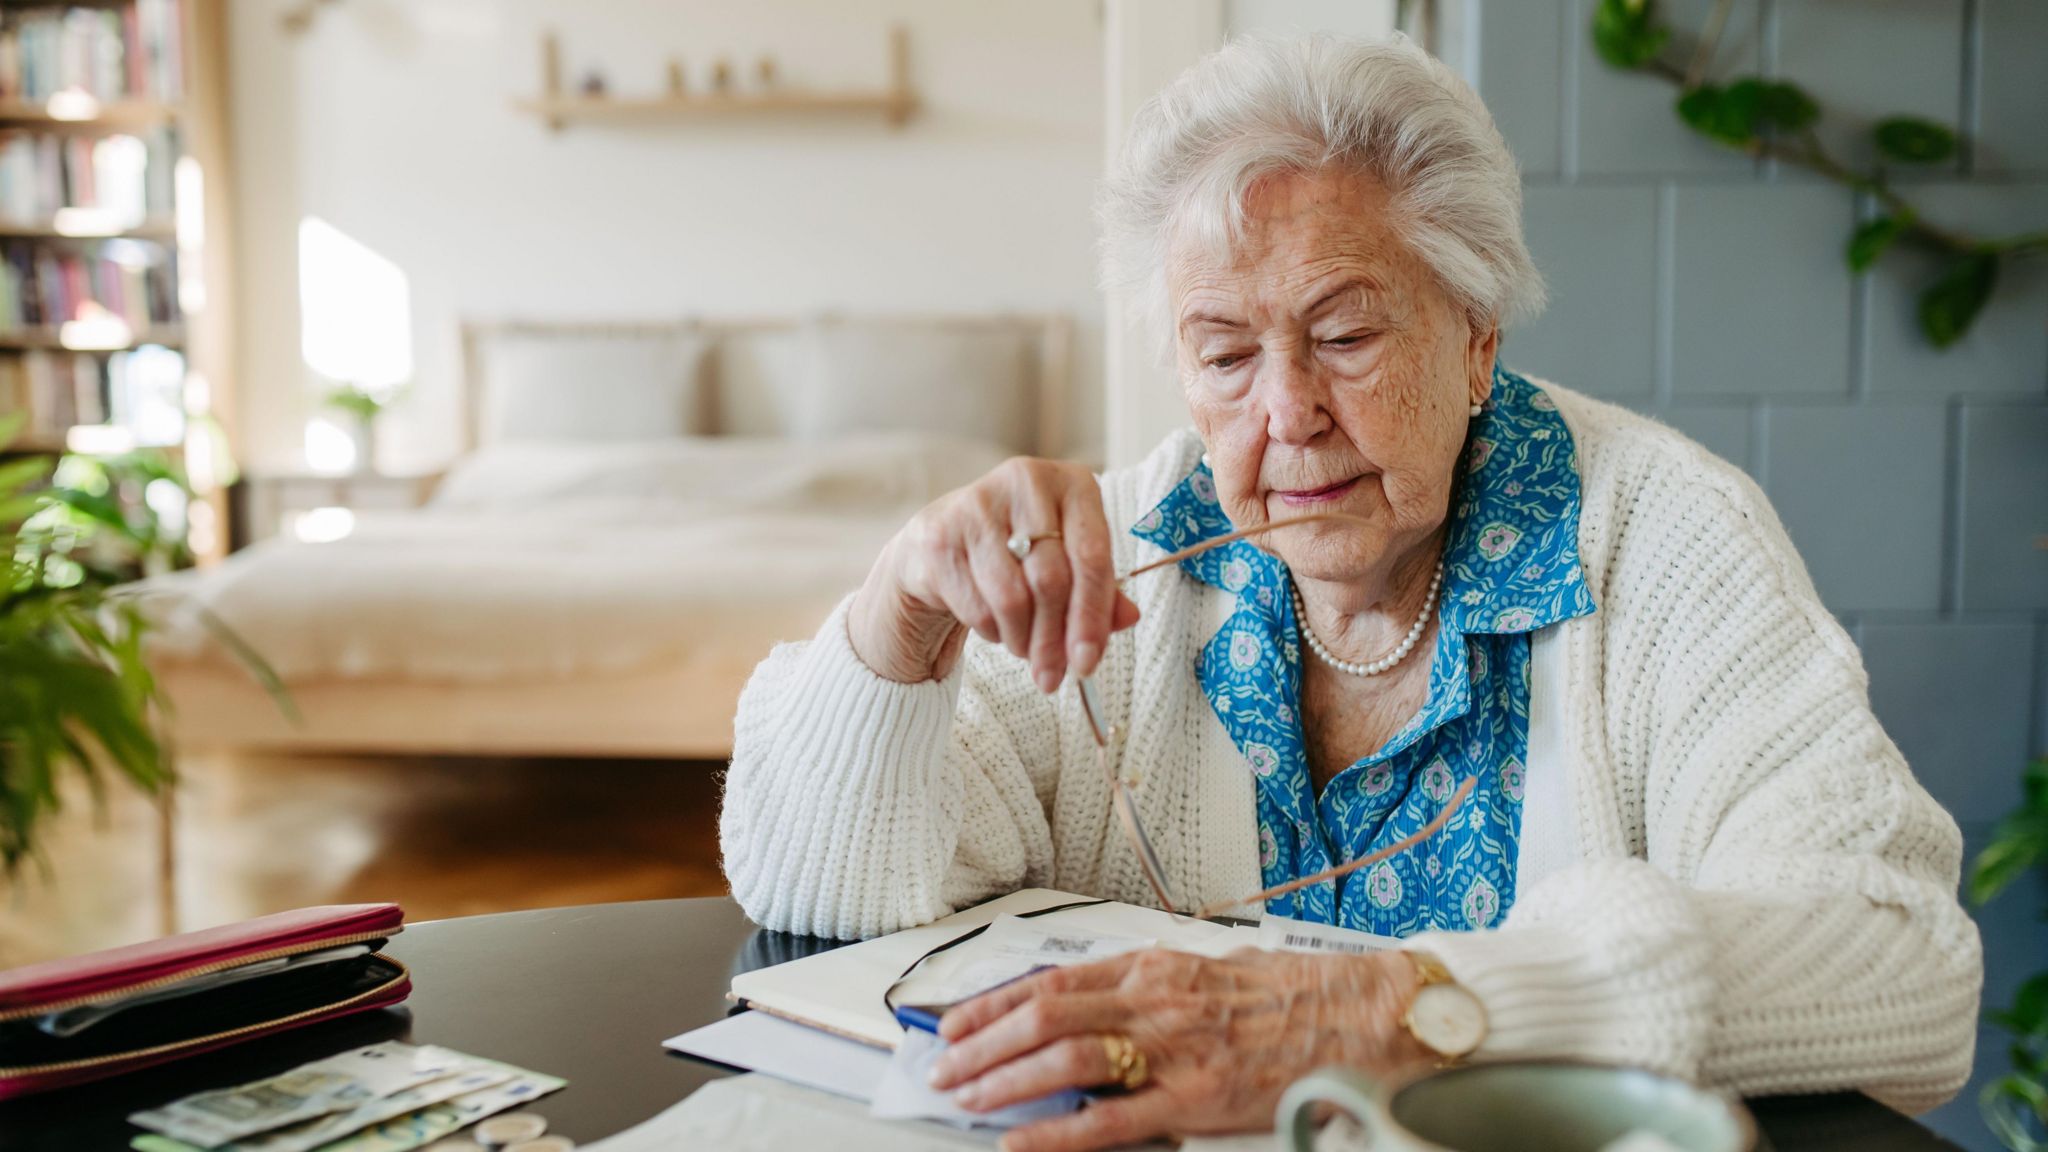 Image of an elderly woman sat at a table with paperwork and bank notes.